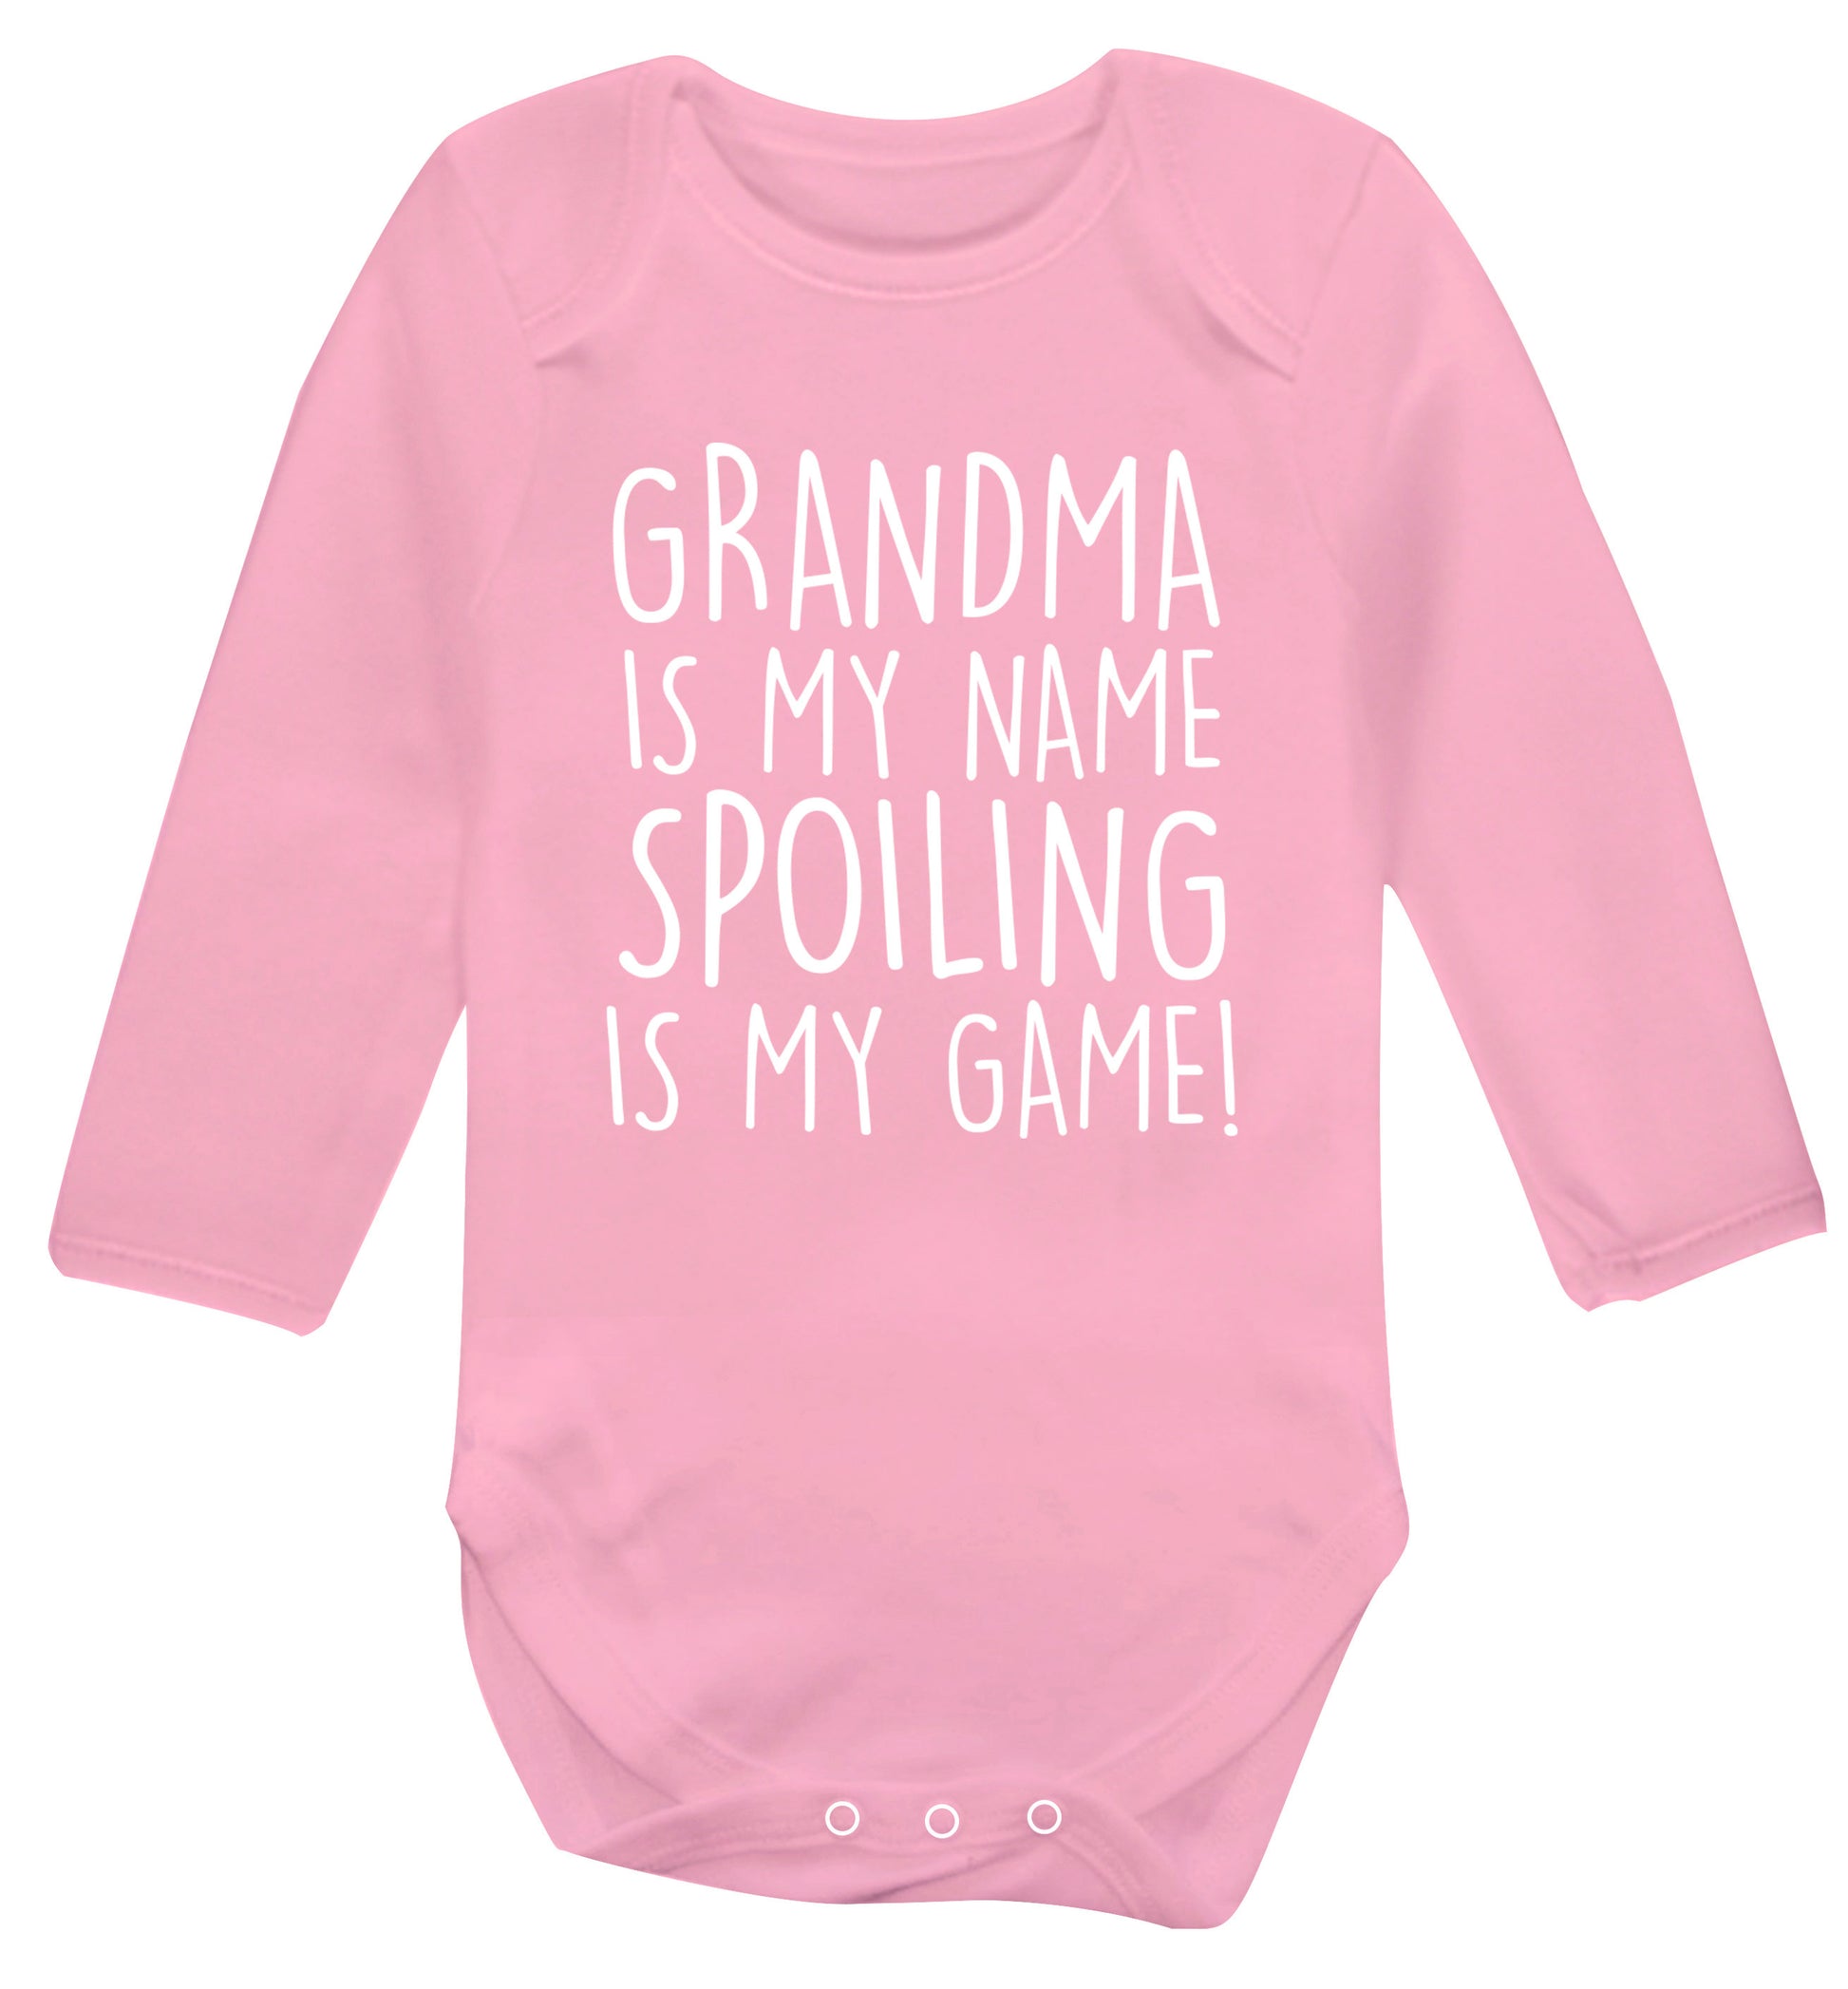 Grandma is my name, spoiling is my game Baby Vest long sleeved pale pink 6-12 months